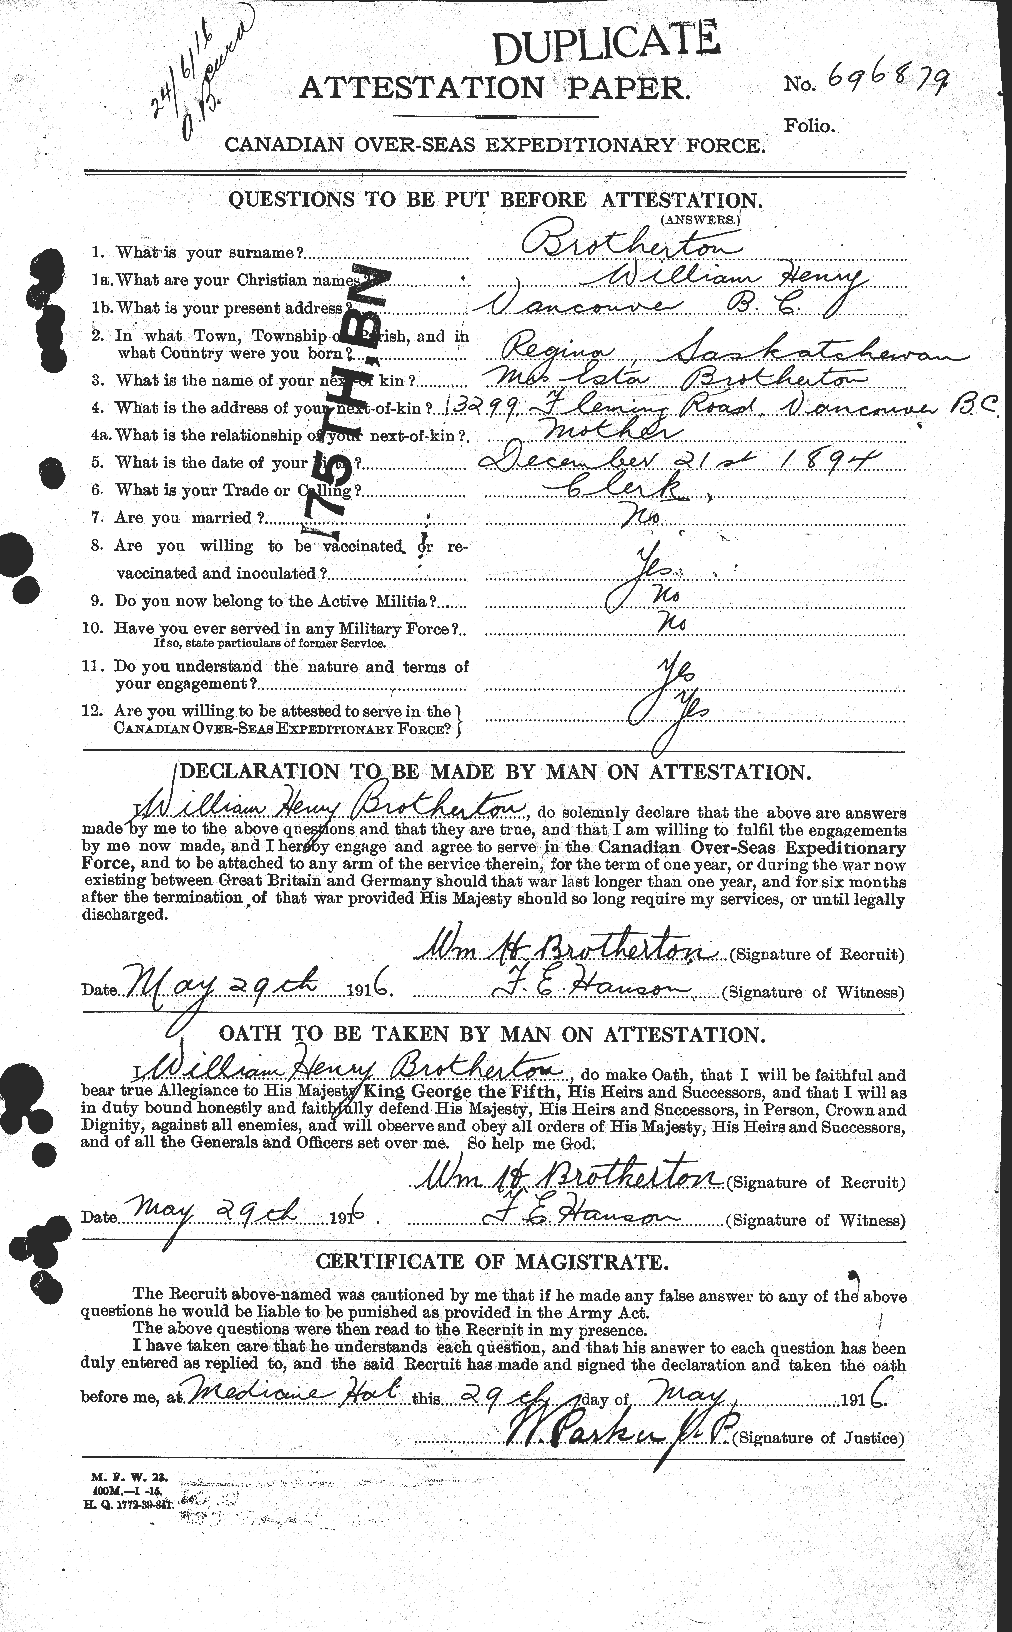 Personnel Records of the First World War - CEF 264995a